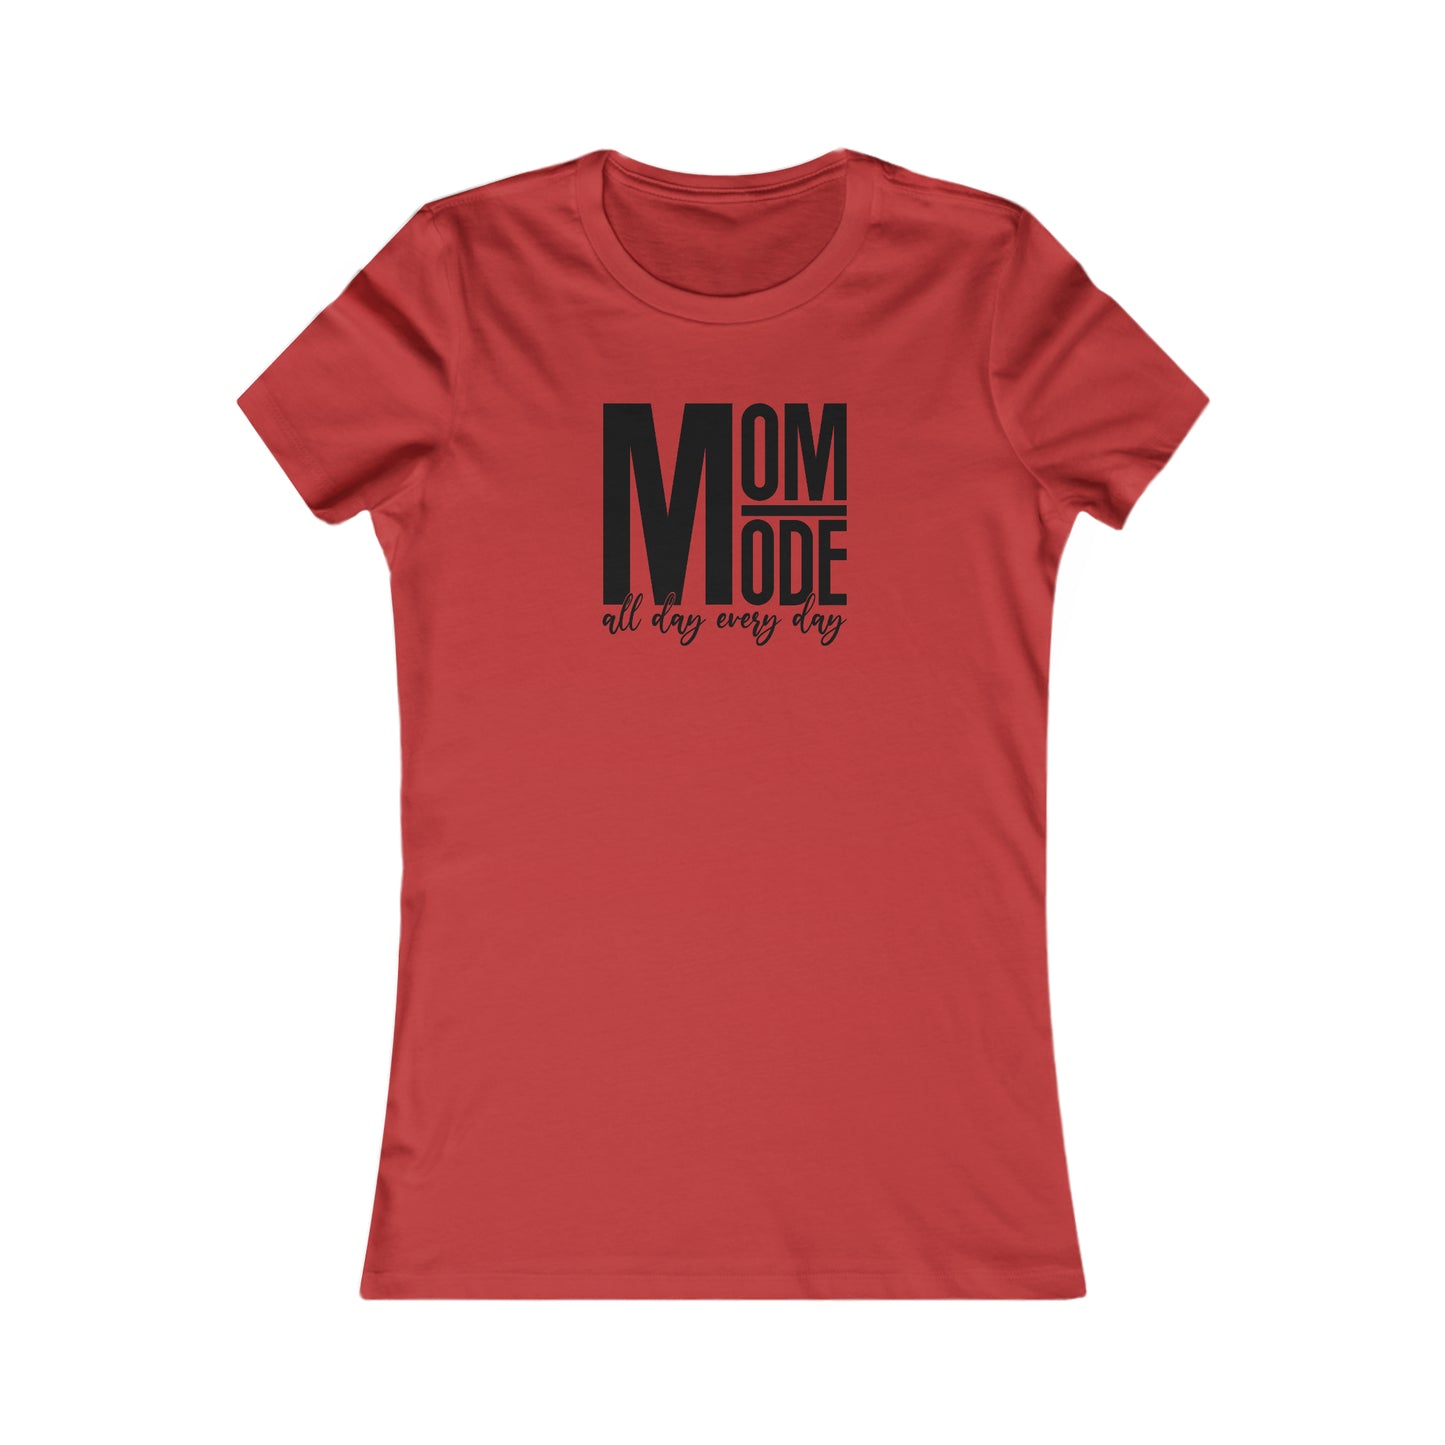 MOM Mode - All Day Every Day - Best Mom - Celebrate Mom - Strong Woman - Mom Humor - Women's Favorite Tee